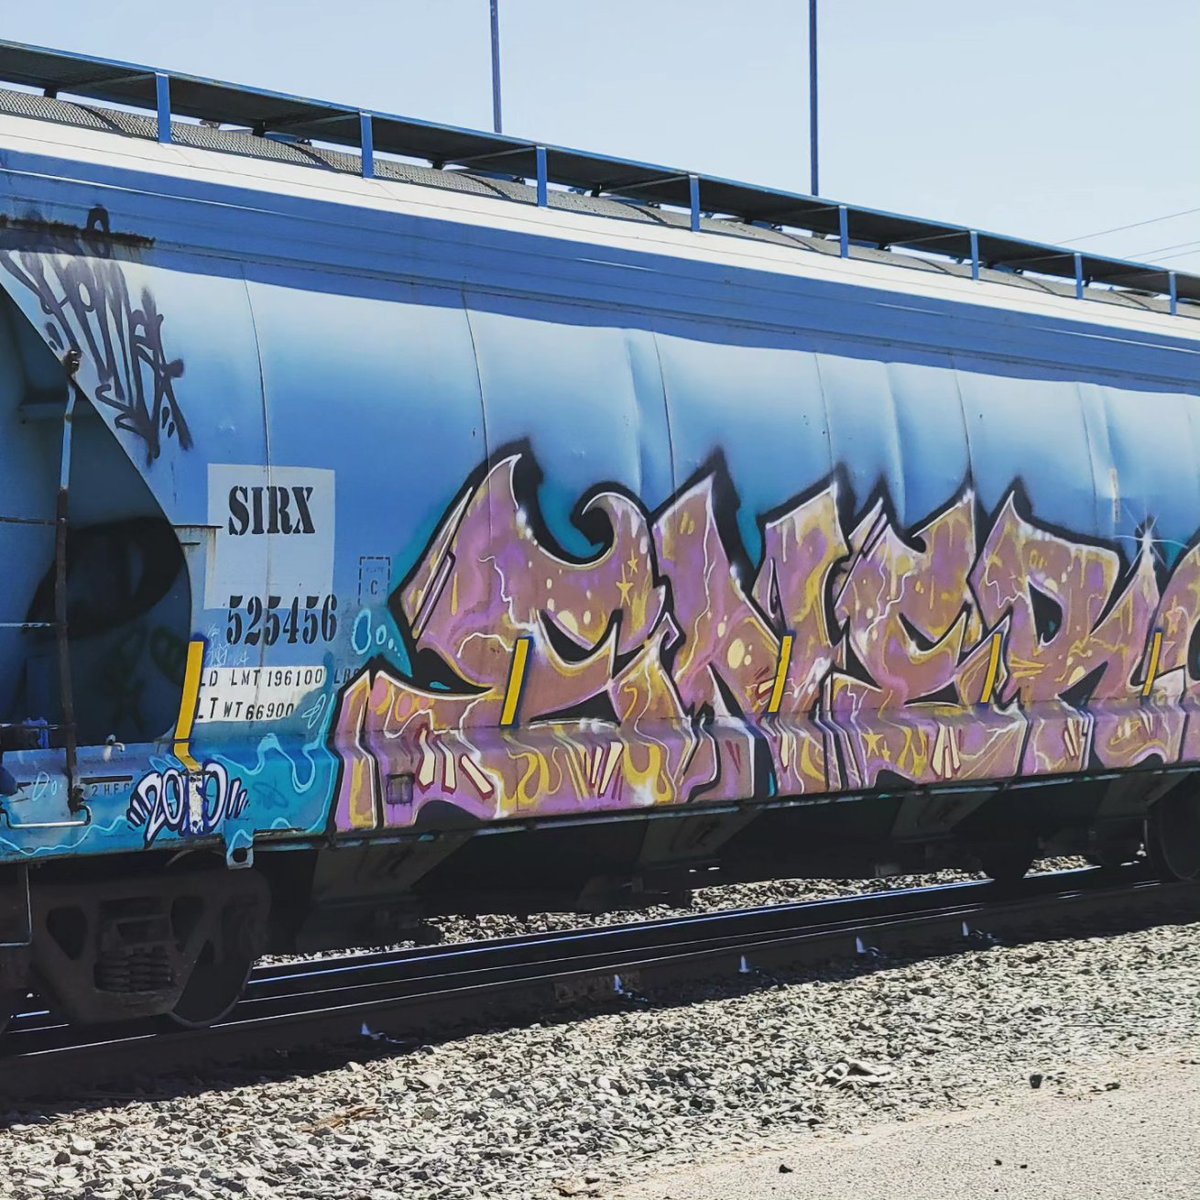 A half dozen #traincars with interesting #graffitiart . Some of these are really good!

#manifest #freight #boxcars #hoppers #traincrewman #photography #traingraffiti #traingallery_ig